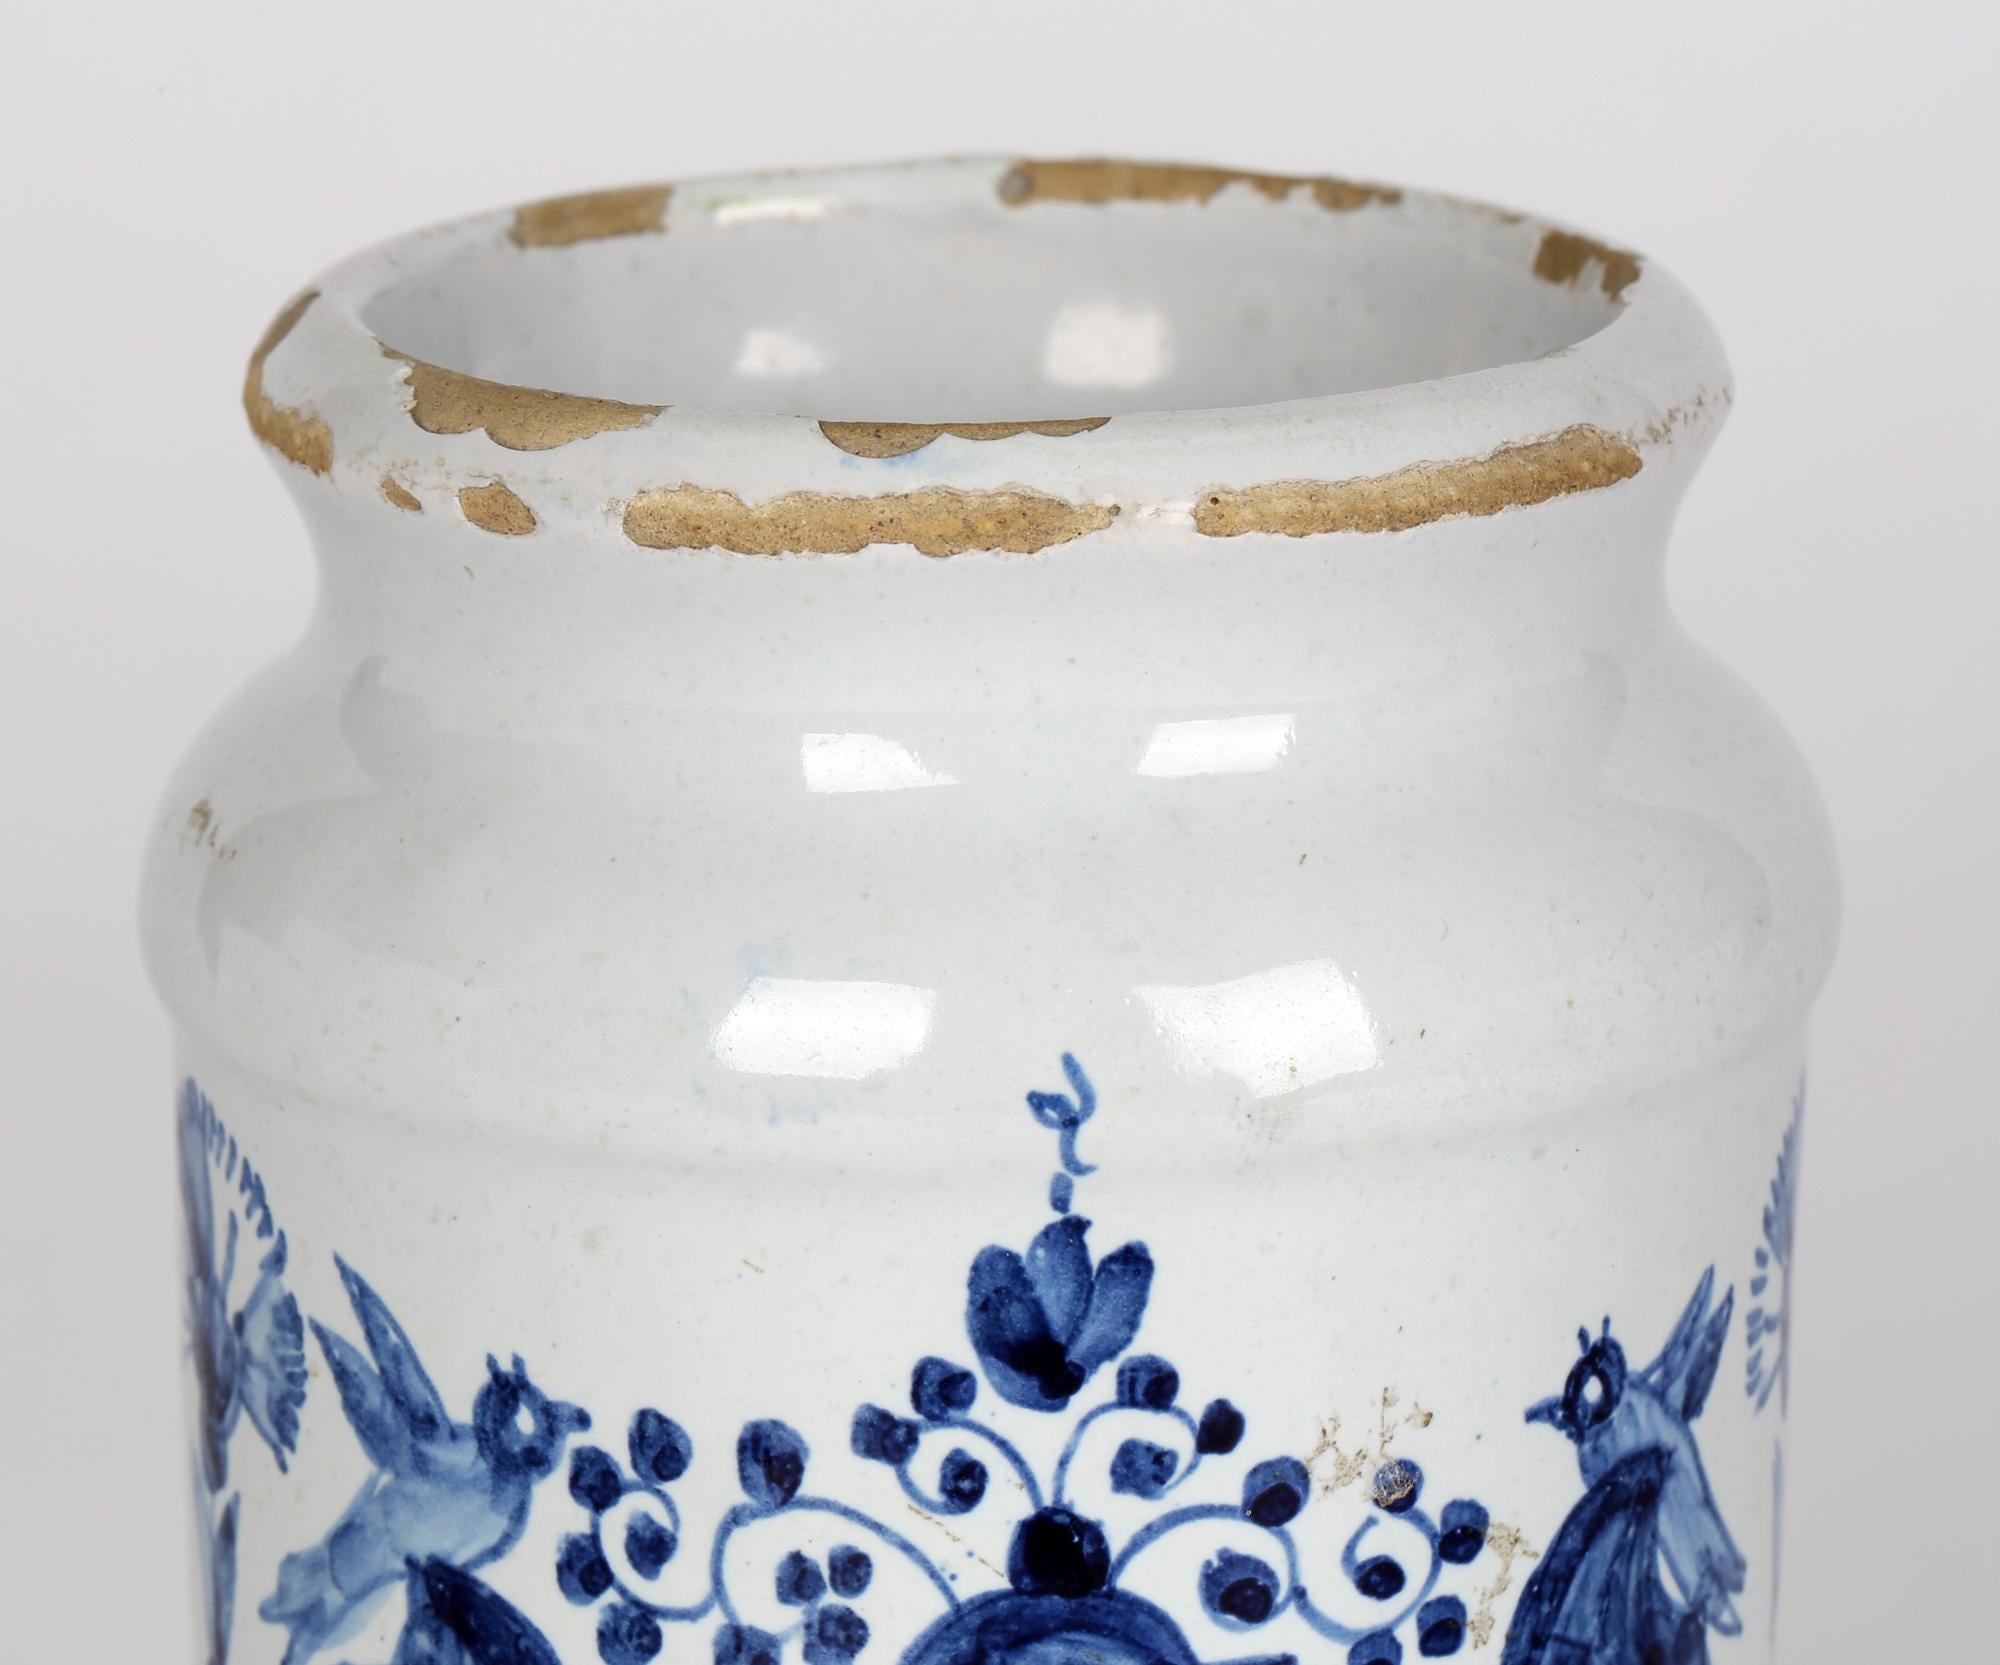 A good Delft blue and white pottery apothecary jar marked CONF.HIACINTOR and dating from around 1750. The jar, of cylindrical form stands on a rounded pedestal foot with a pinched top rim and slightly flared top. The jar is hand decorated with a